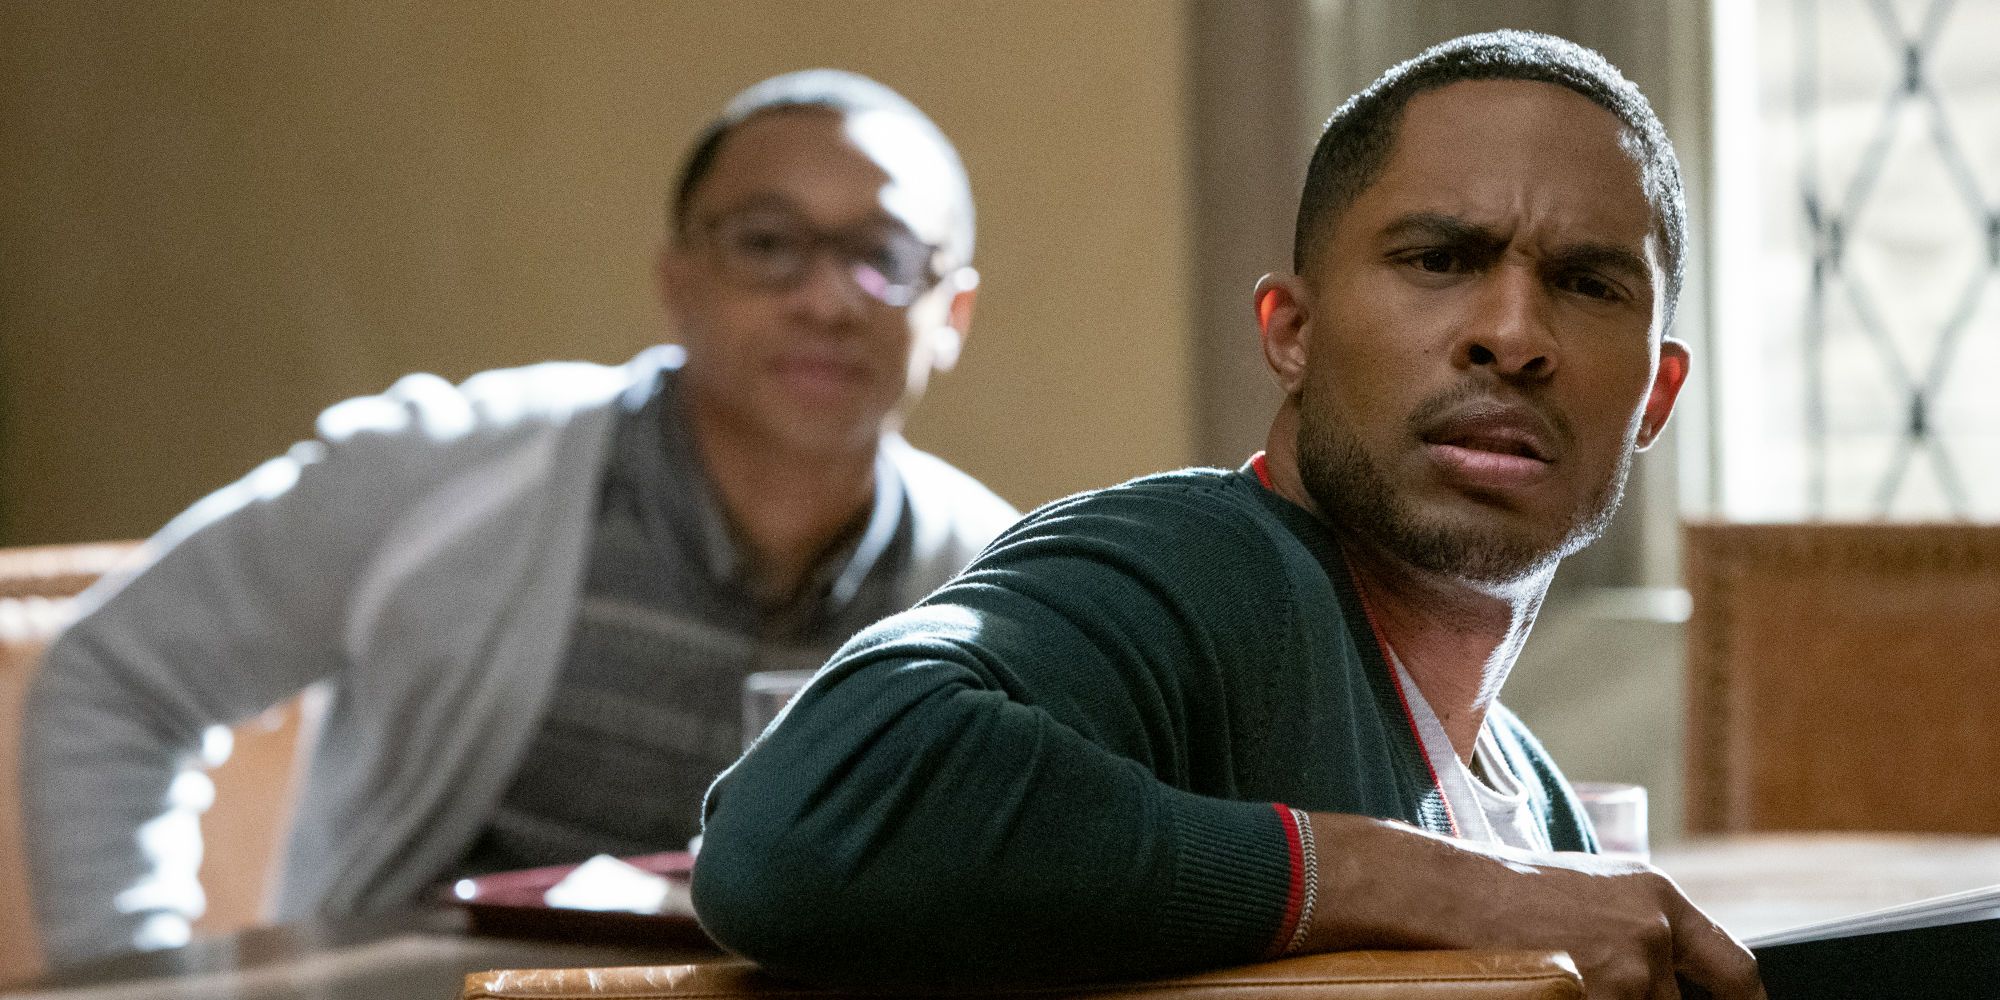 What To Expect From Dear White People Season 4